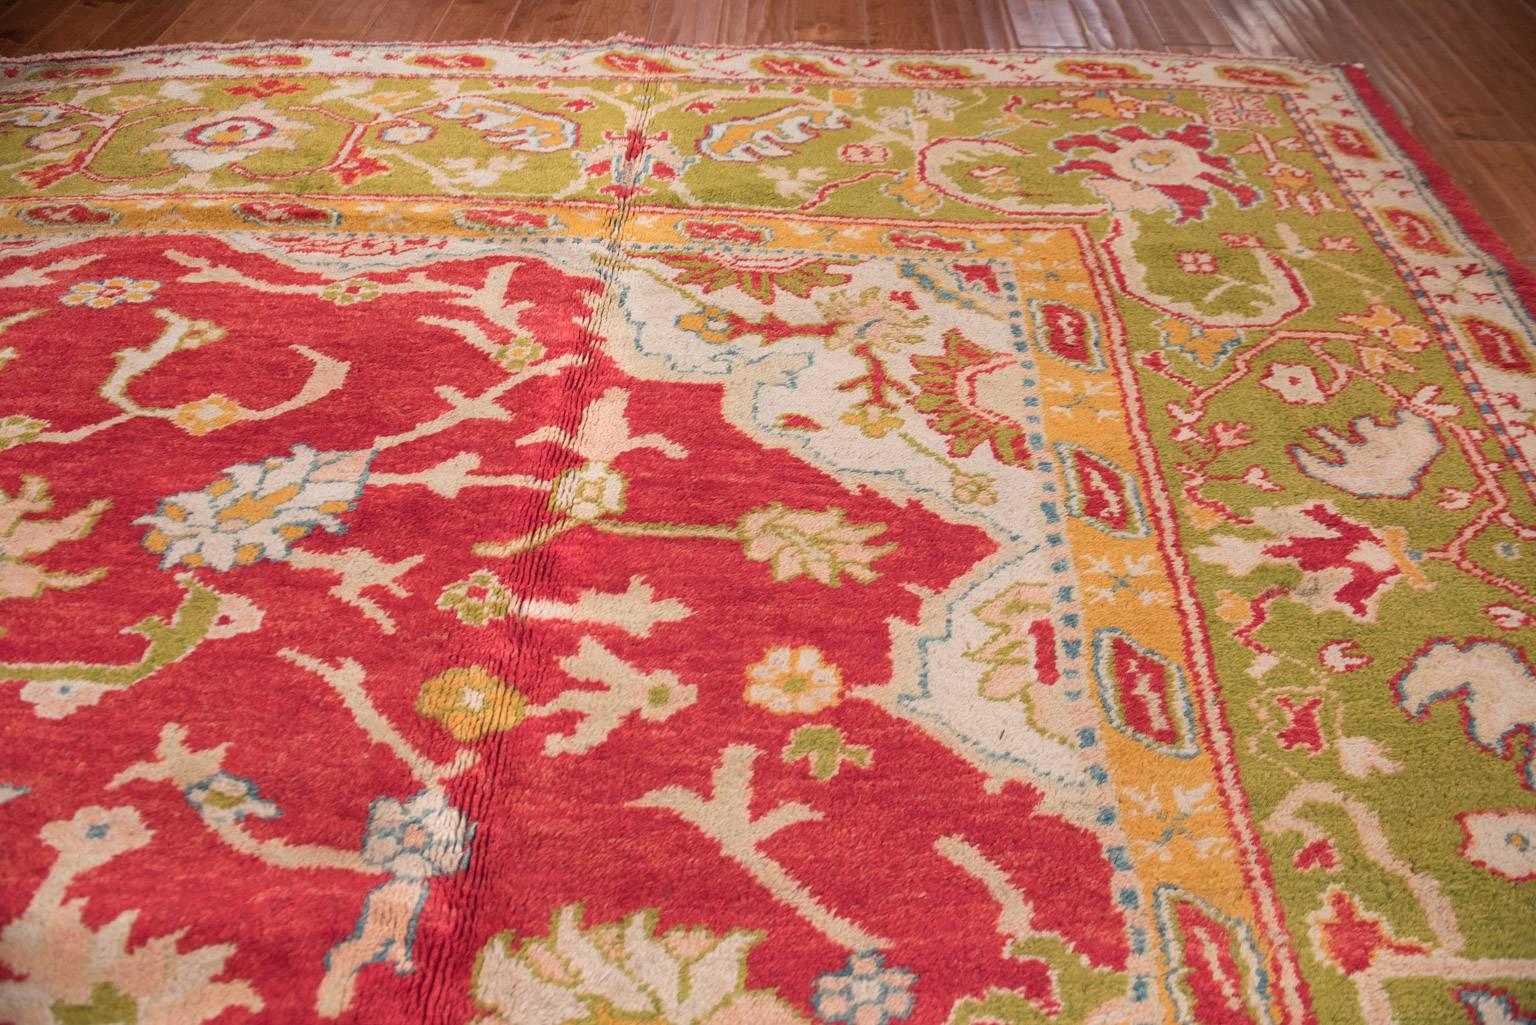 Antique Oushak Rug 19th Century Red and Green Squarish In Excellent Condition For Sale In Dallas, TX